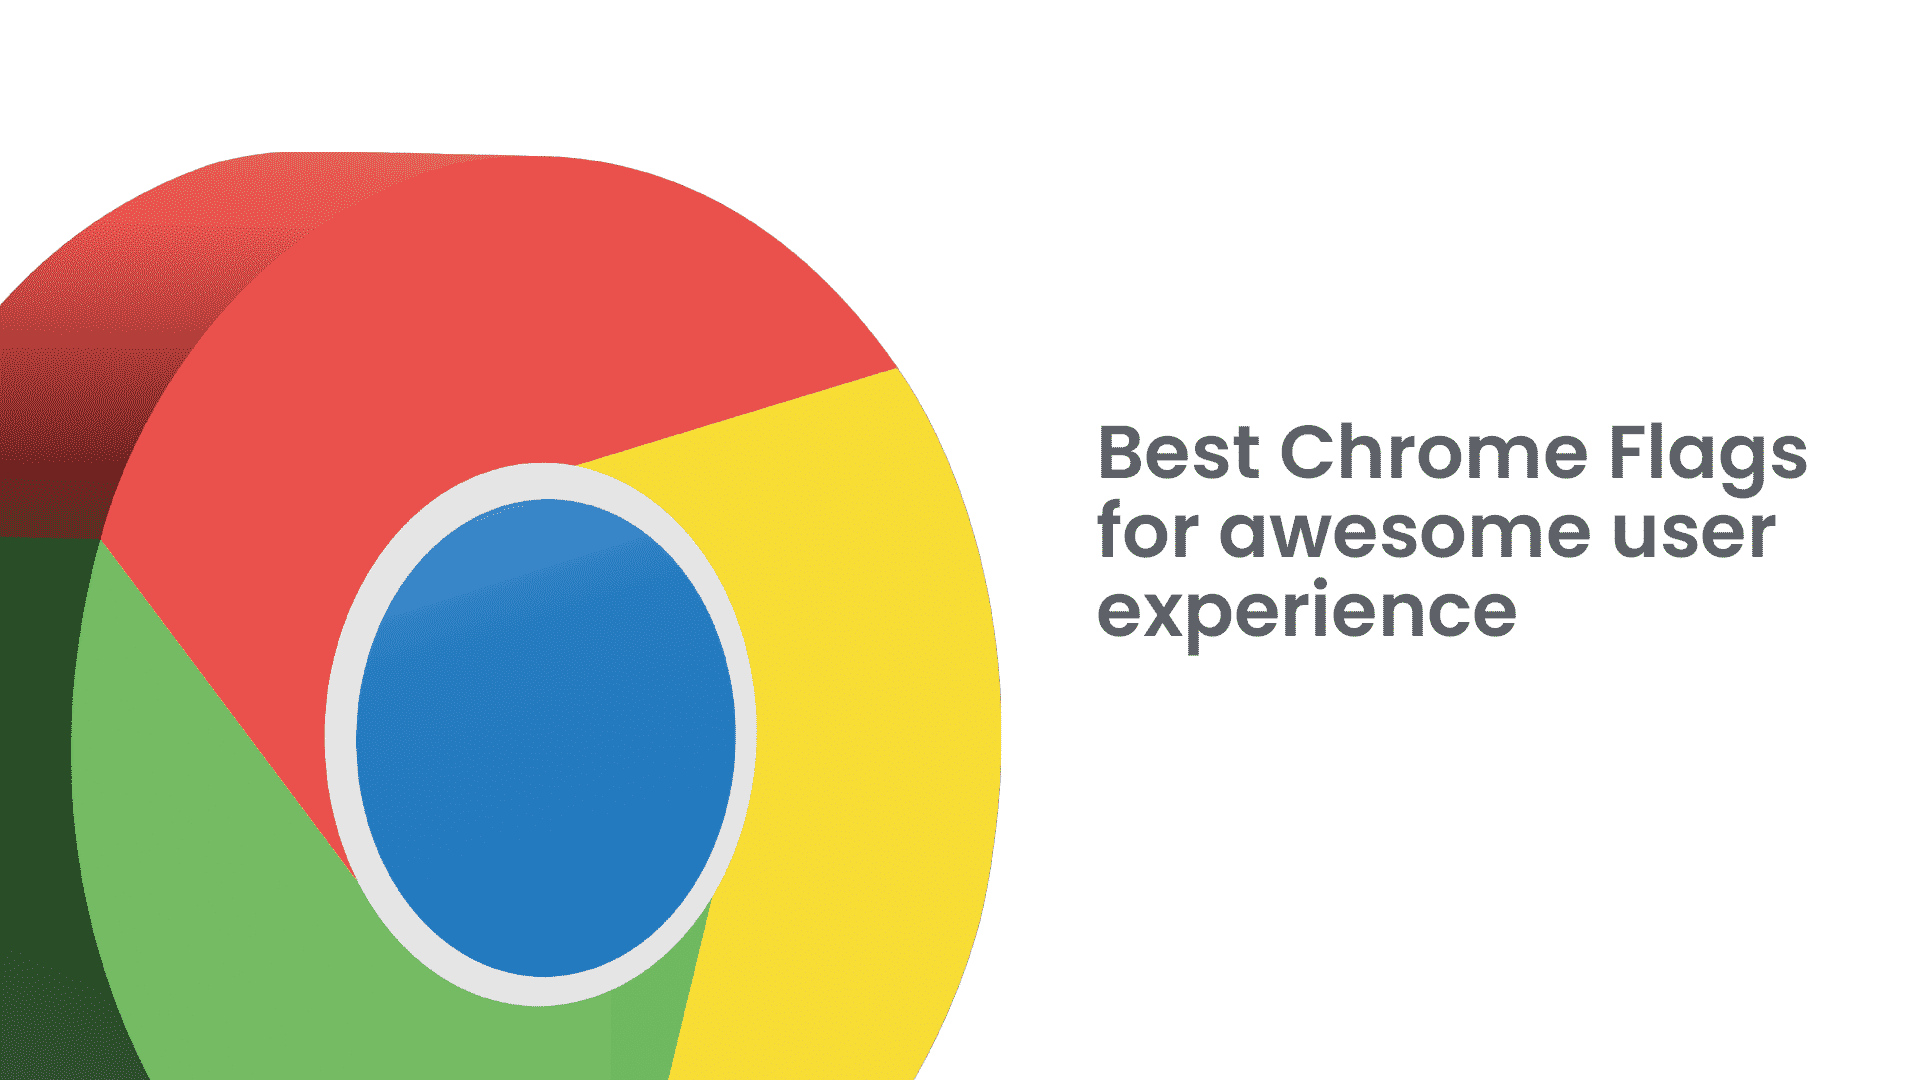 What are the best Chrome flags to try out on websites?